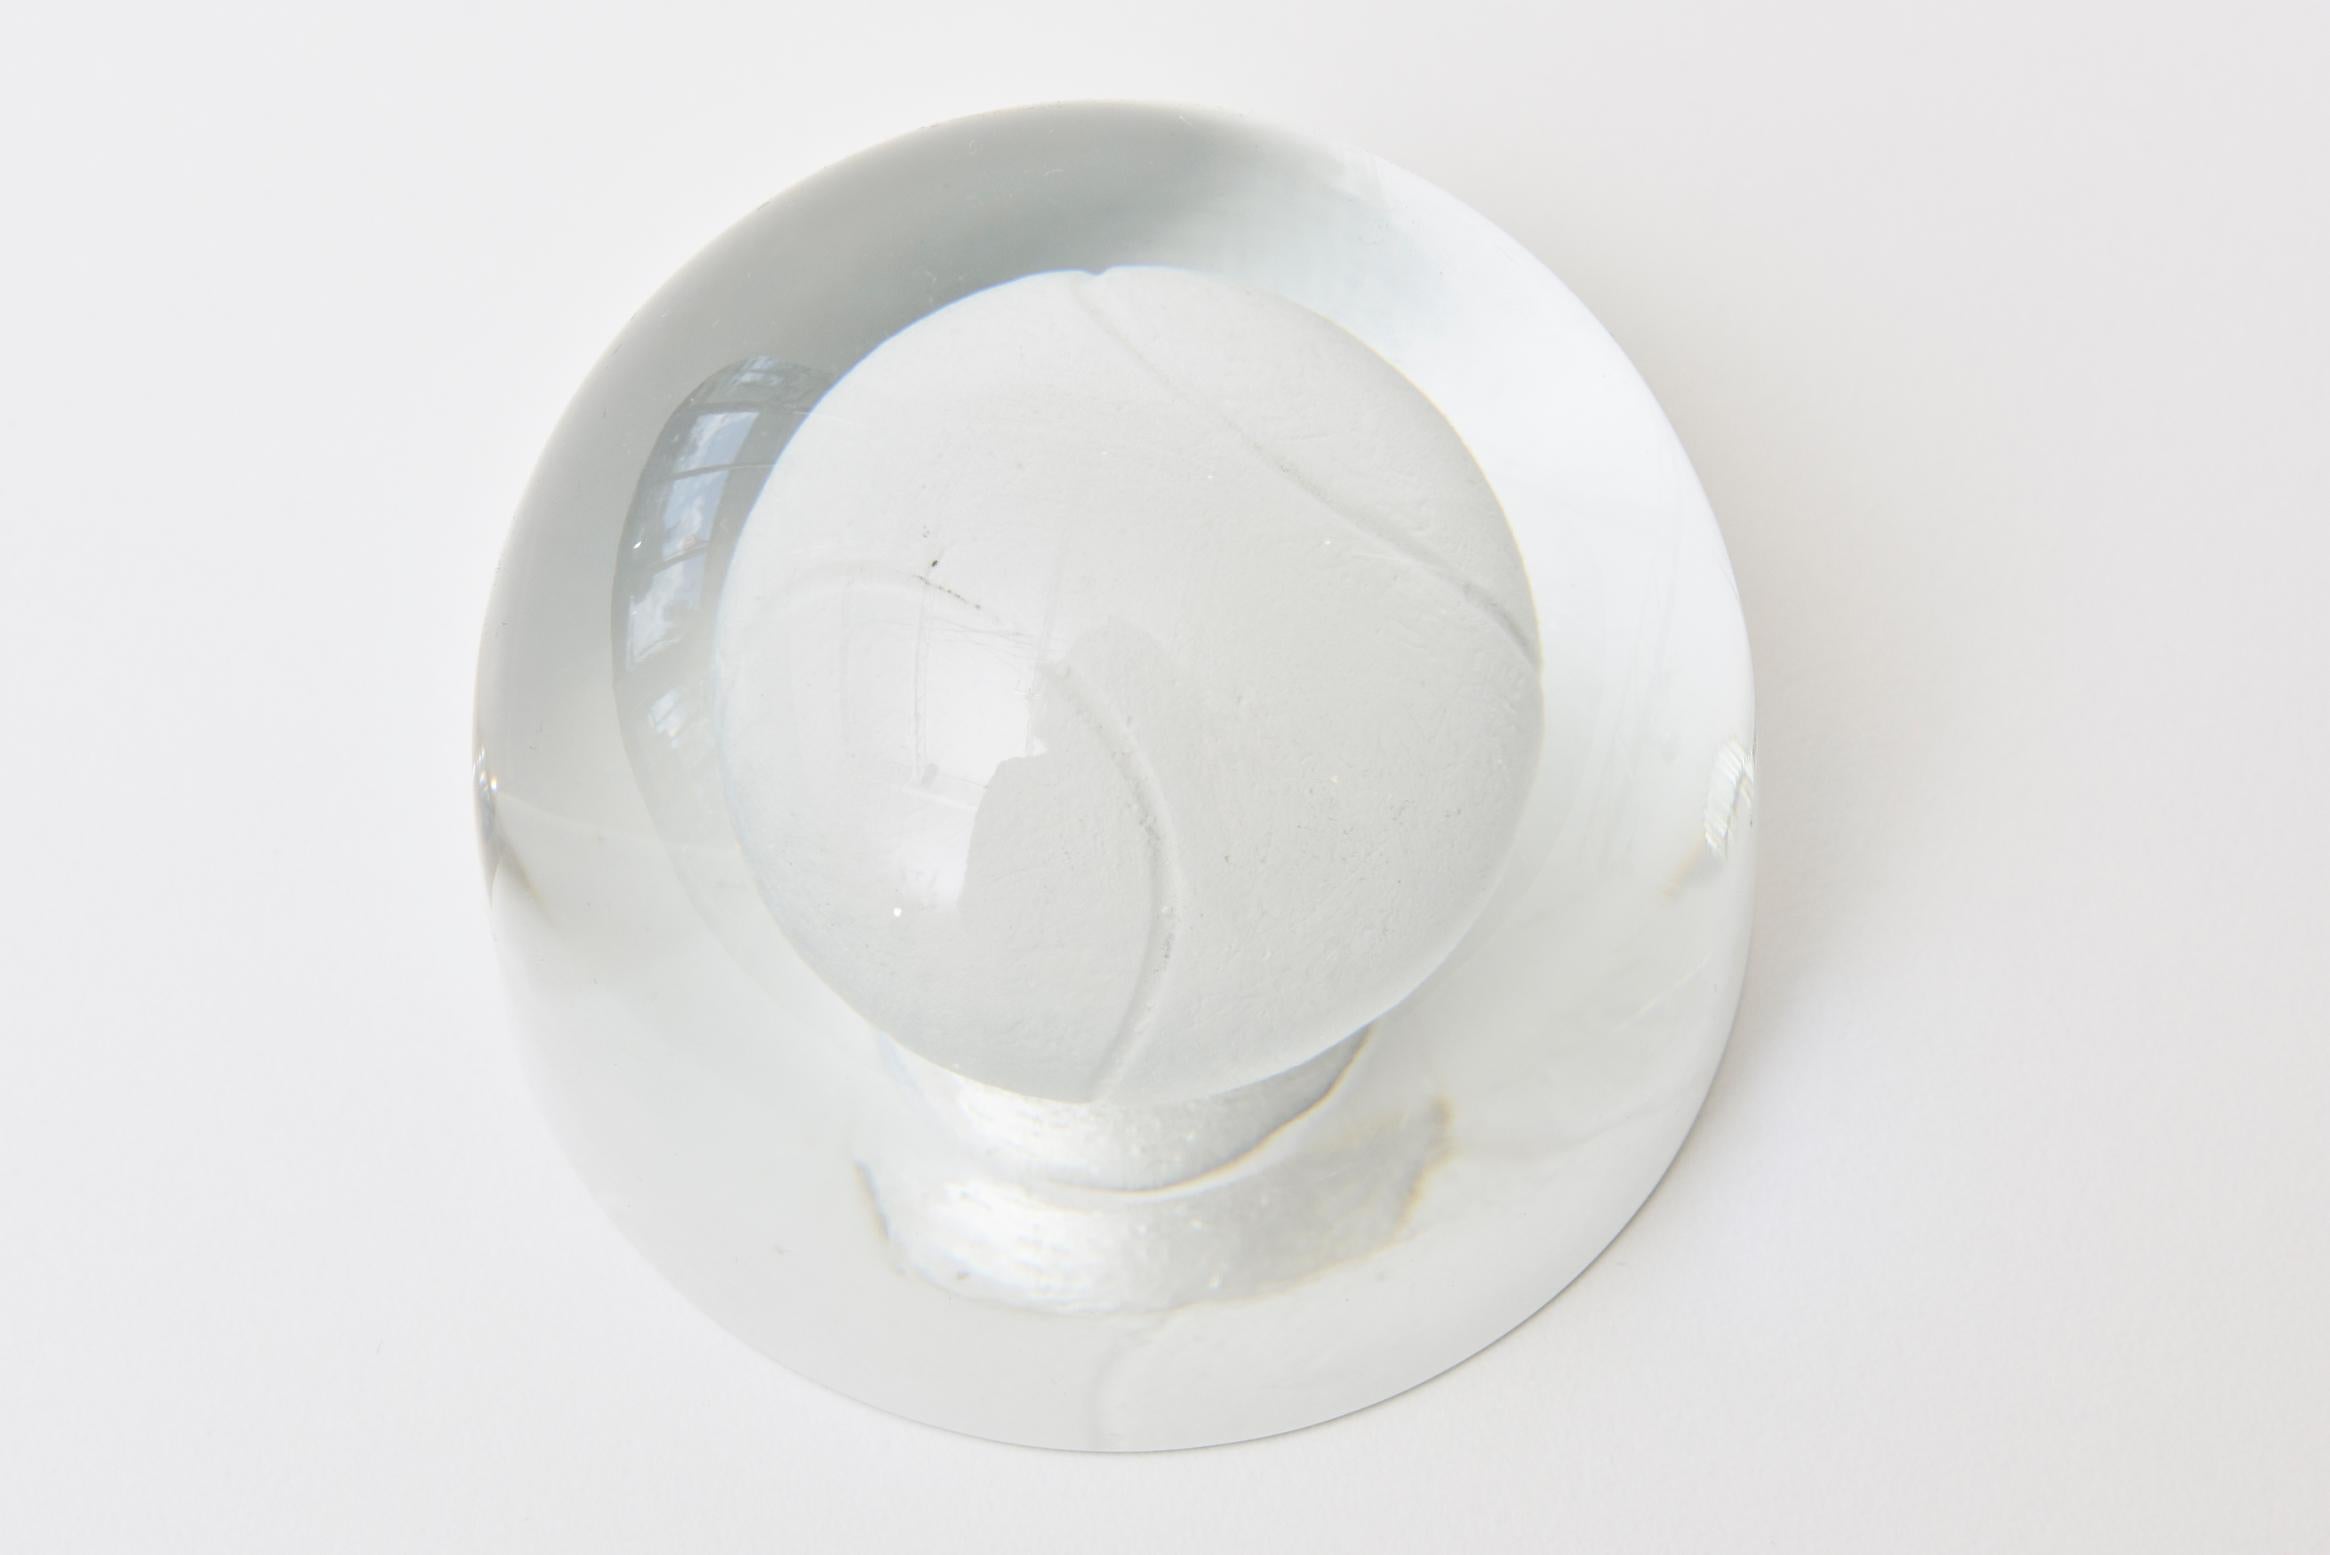 For all the tennis lovers and players, this great Austrian dome like clear glass tennis ball paperweight is a great desk accessory. There is a mini version of the tennis ball embedded in the glass and is more of frosted style glass tennis ball with